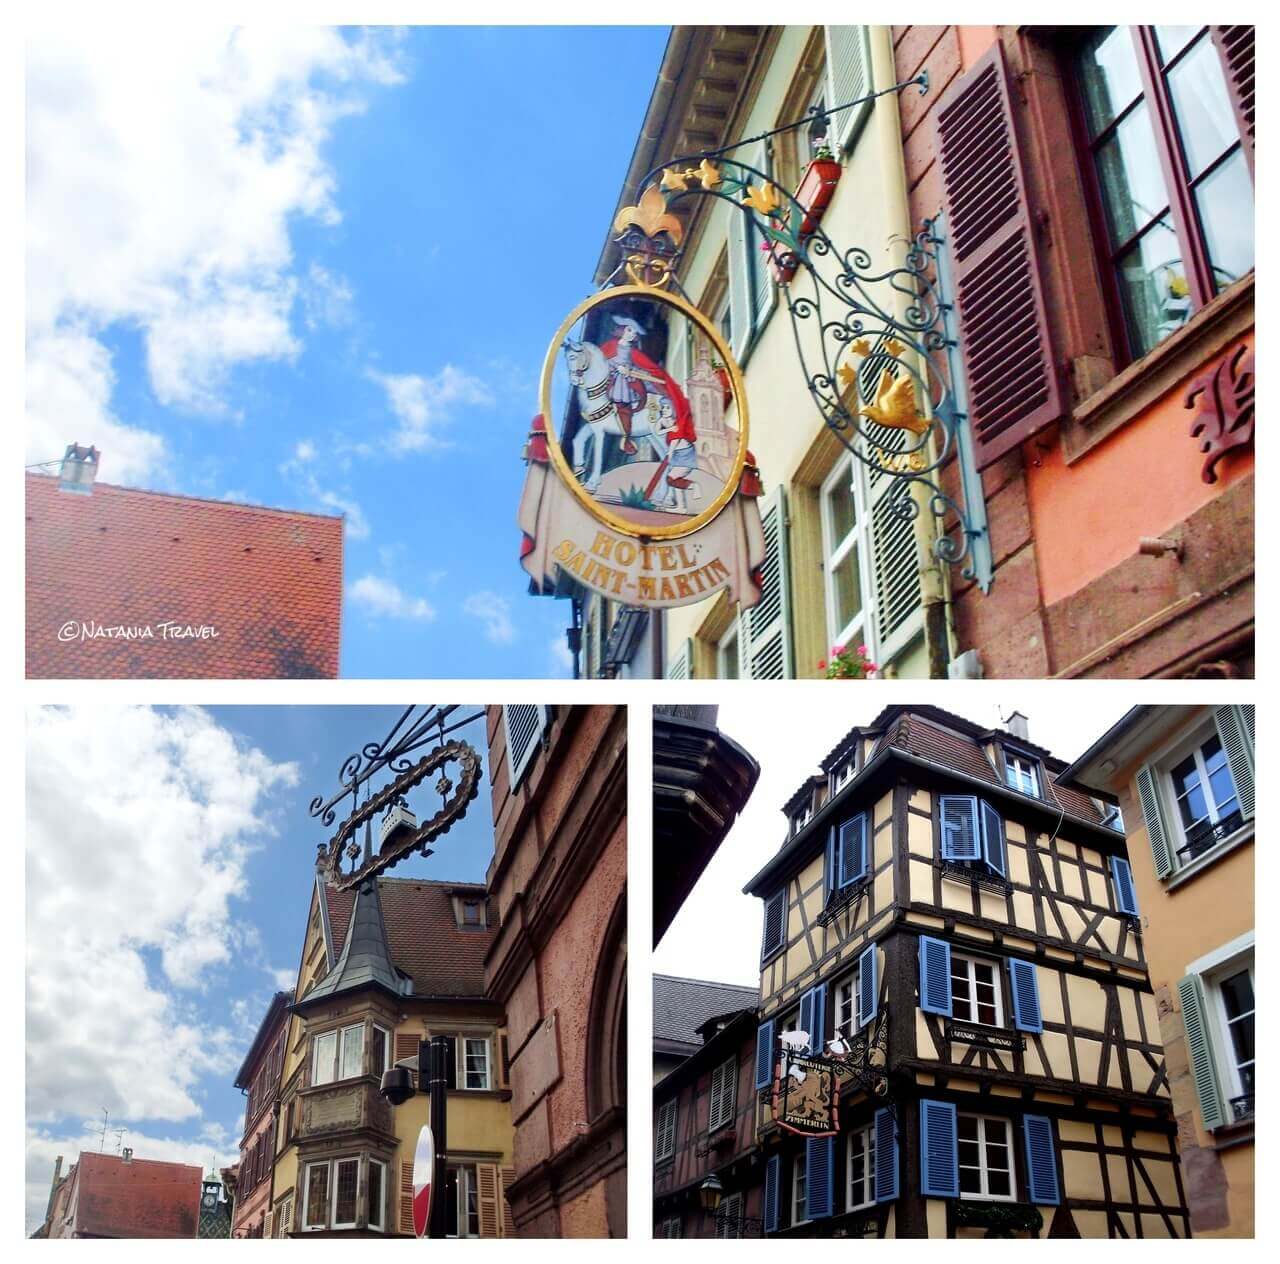 The houses with the different signs, Colmar